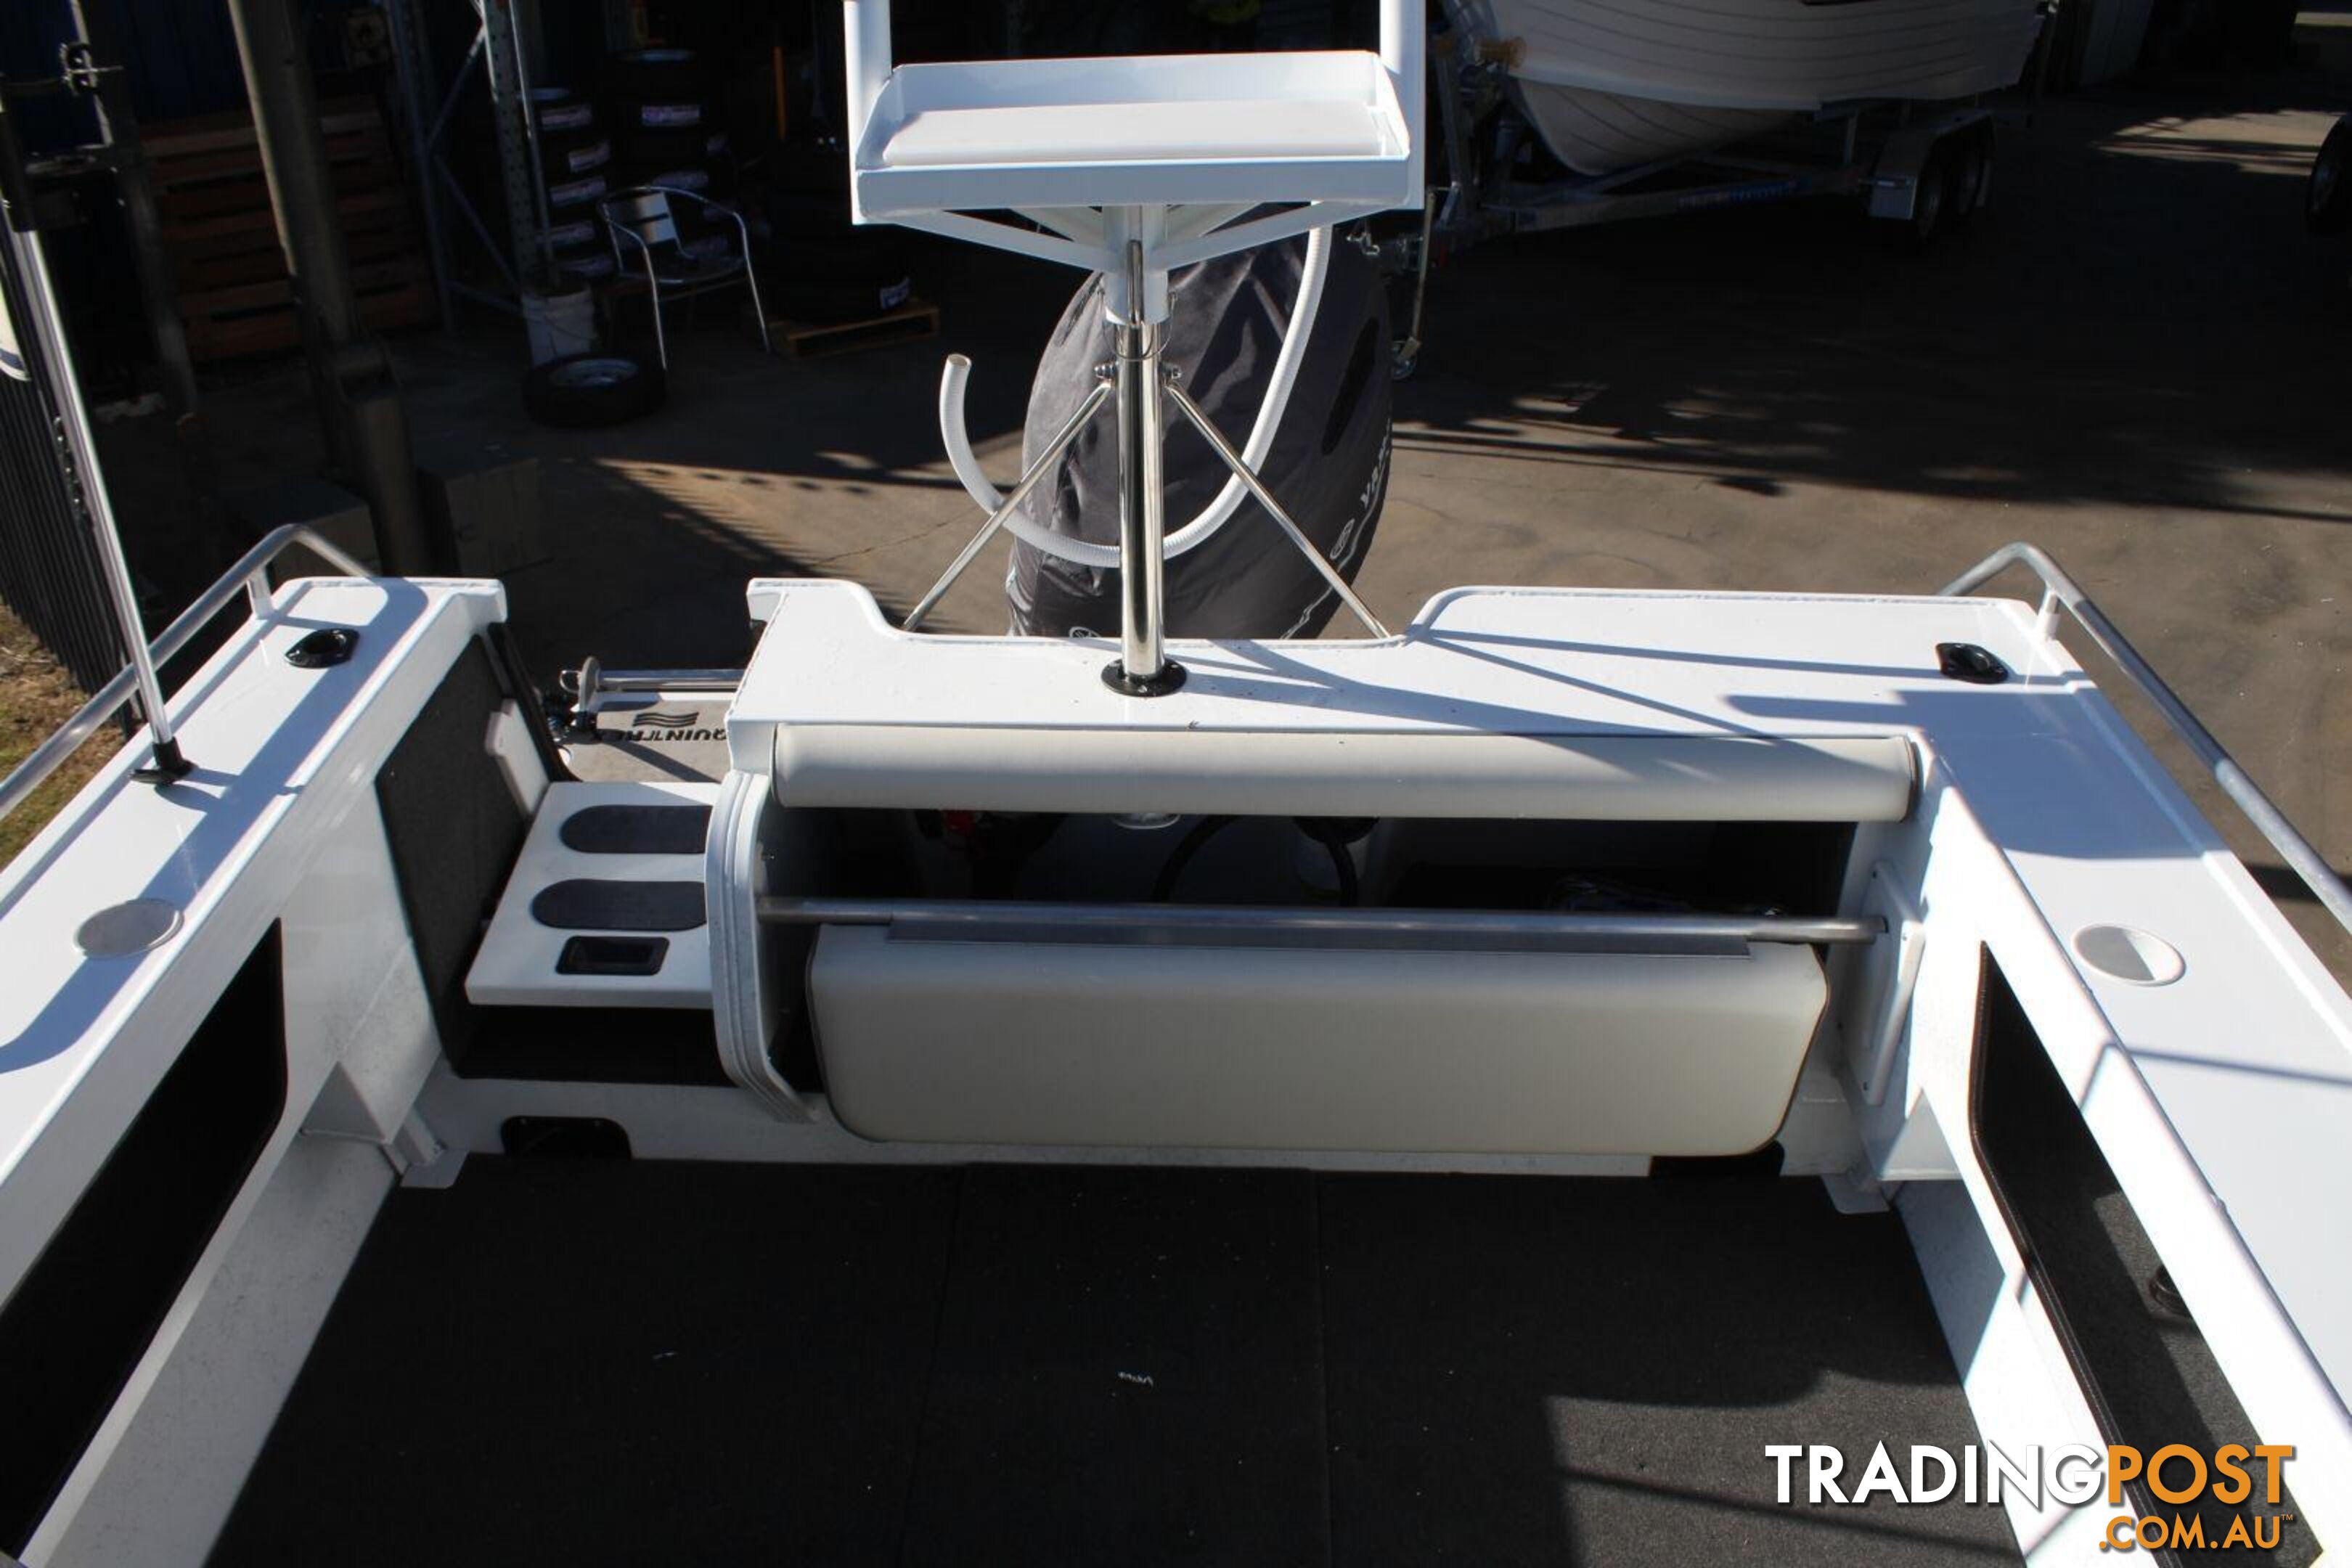 Quintrex 540 Ocean Spirit + Yamaha F130hp 4-Stroke - Pack 3 for sale online prices